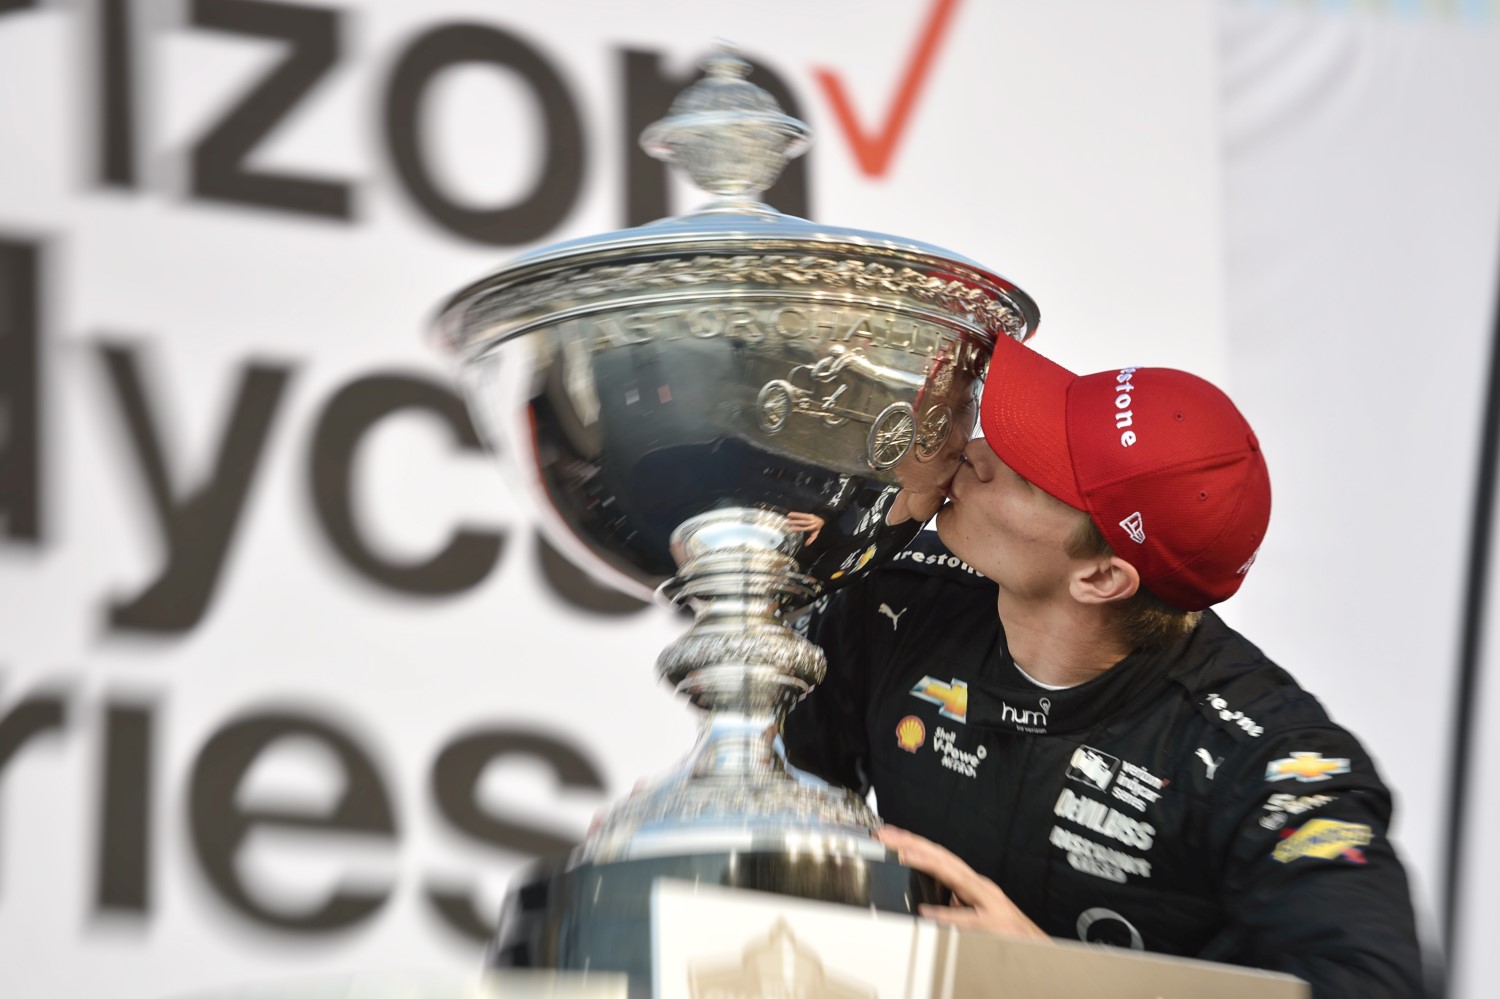 Newgarden will likely kiss the Astor Cup for a 2nd time on Sunday